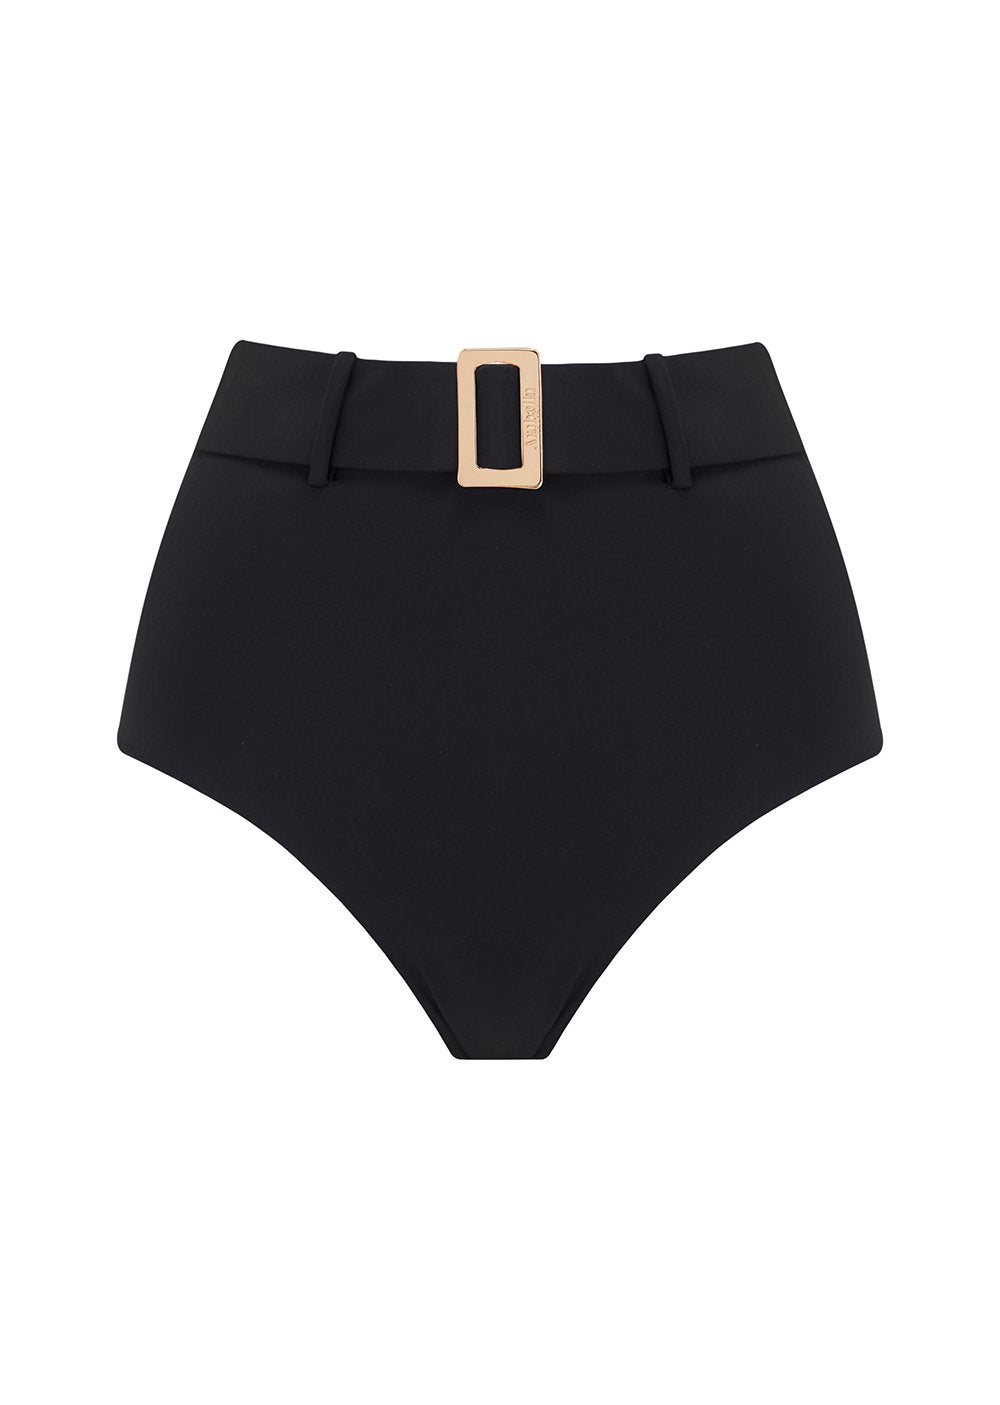 The Belted Brief (High Leg) - Black